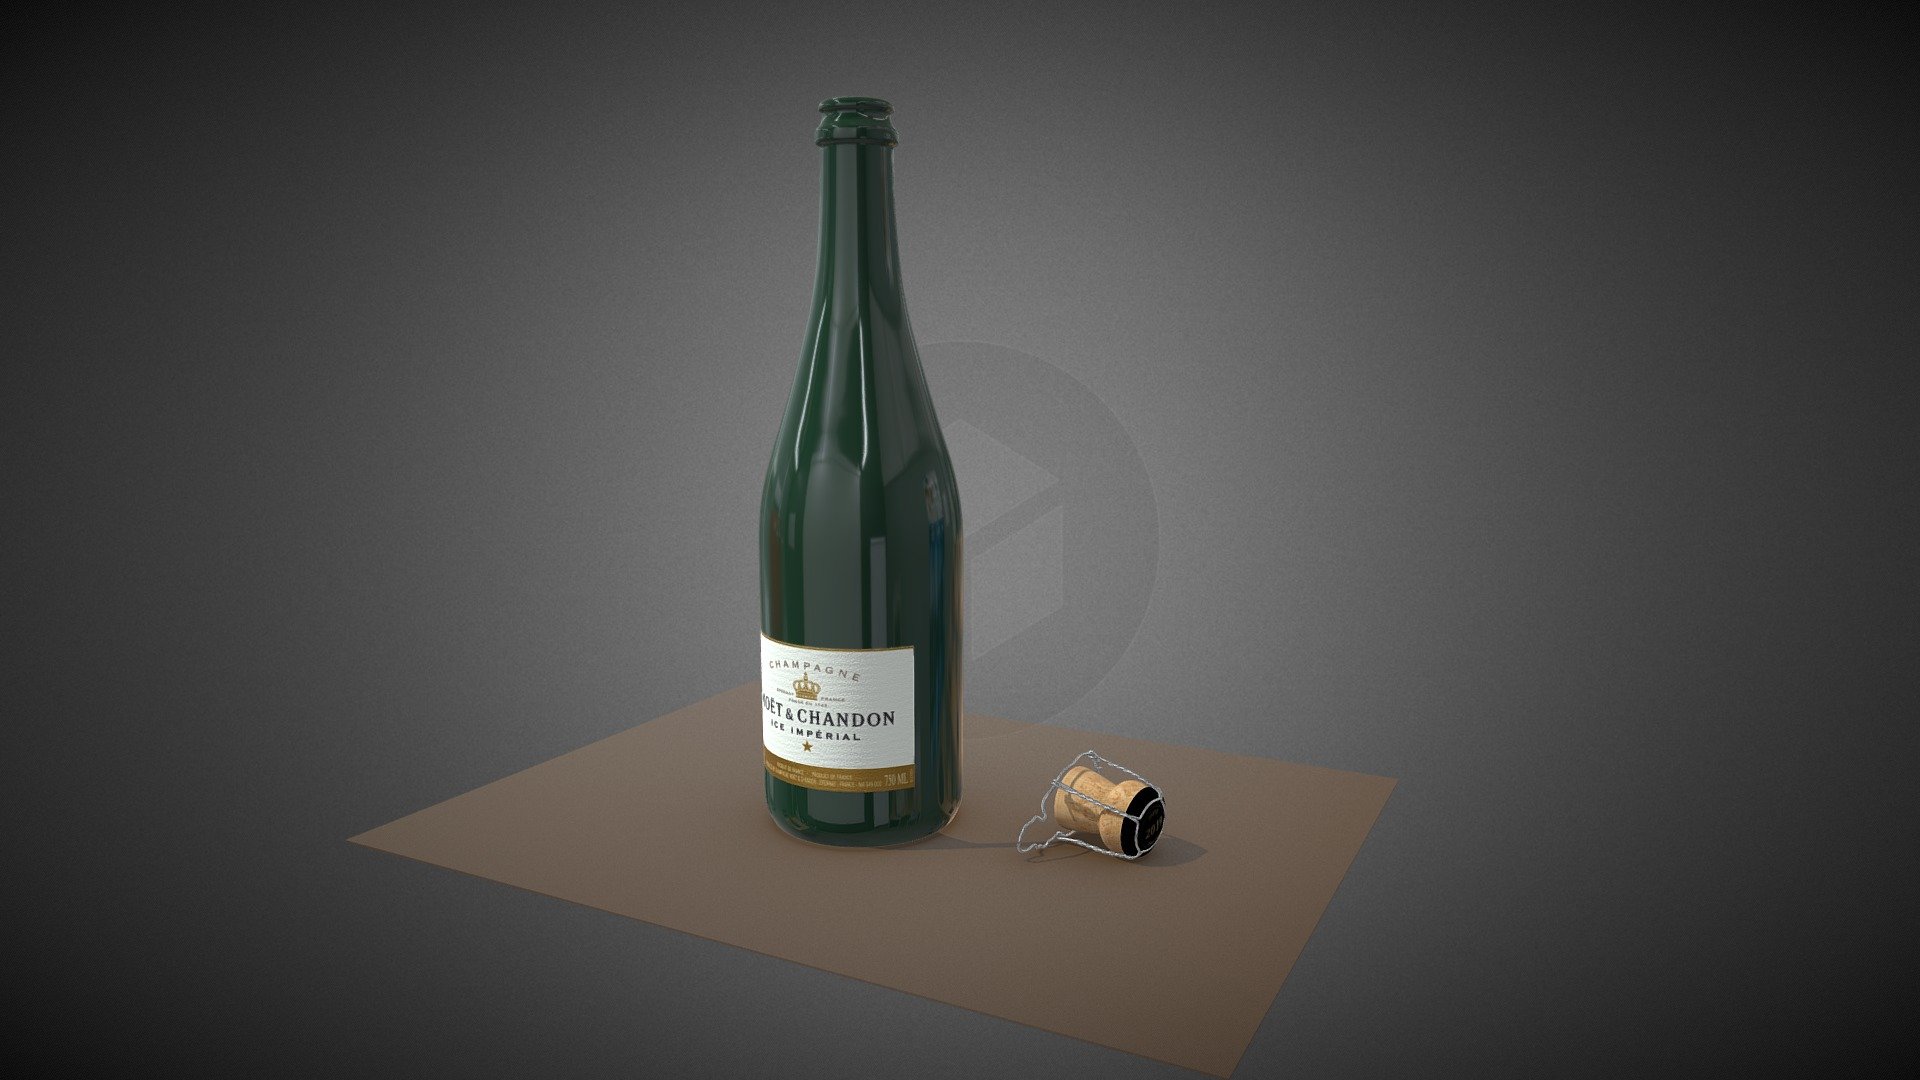 This bottle was made late in last year. I just forget to upload it before.

Modeled with Wings3D 2.2.6.
PBR textures created with Gimp 2.10.4 - Champagne Bottle - Happy New Year 2019 - 3D model by Micheus 3d model